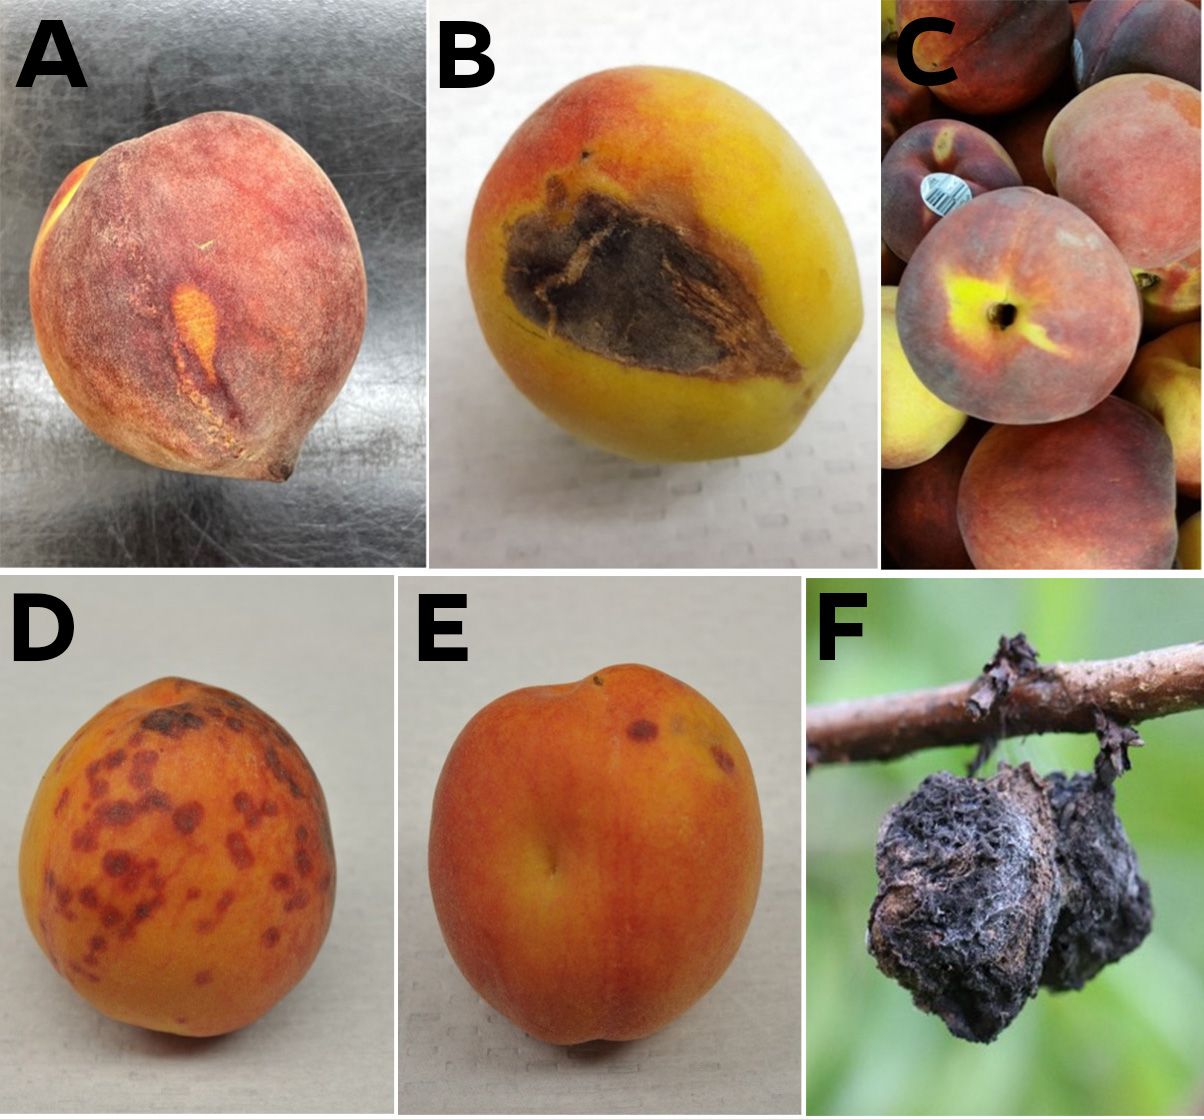 Examples of peach preharvest defects. Russeting (A.), abrasion (B.), and split pit (C.). Insect damage from scale, (D.) and stink bug (E.). Brown rot decay (F.). 